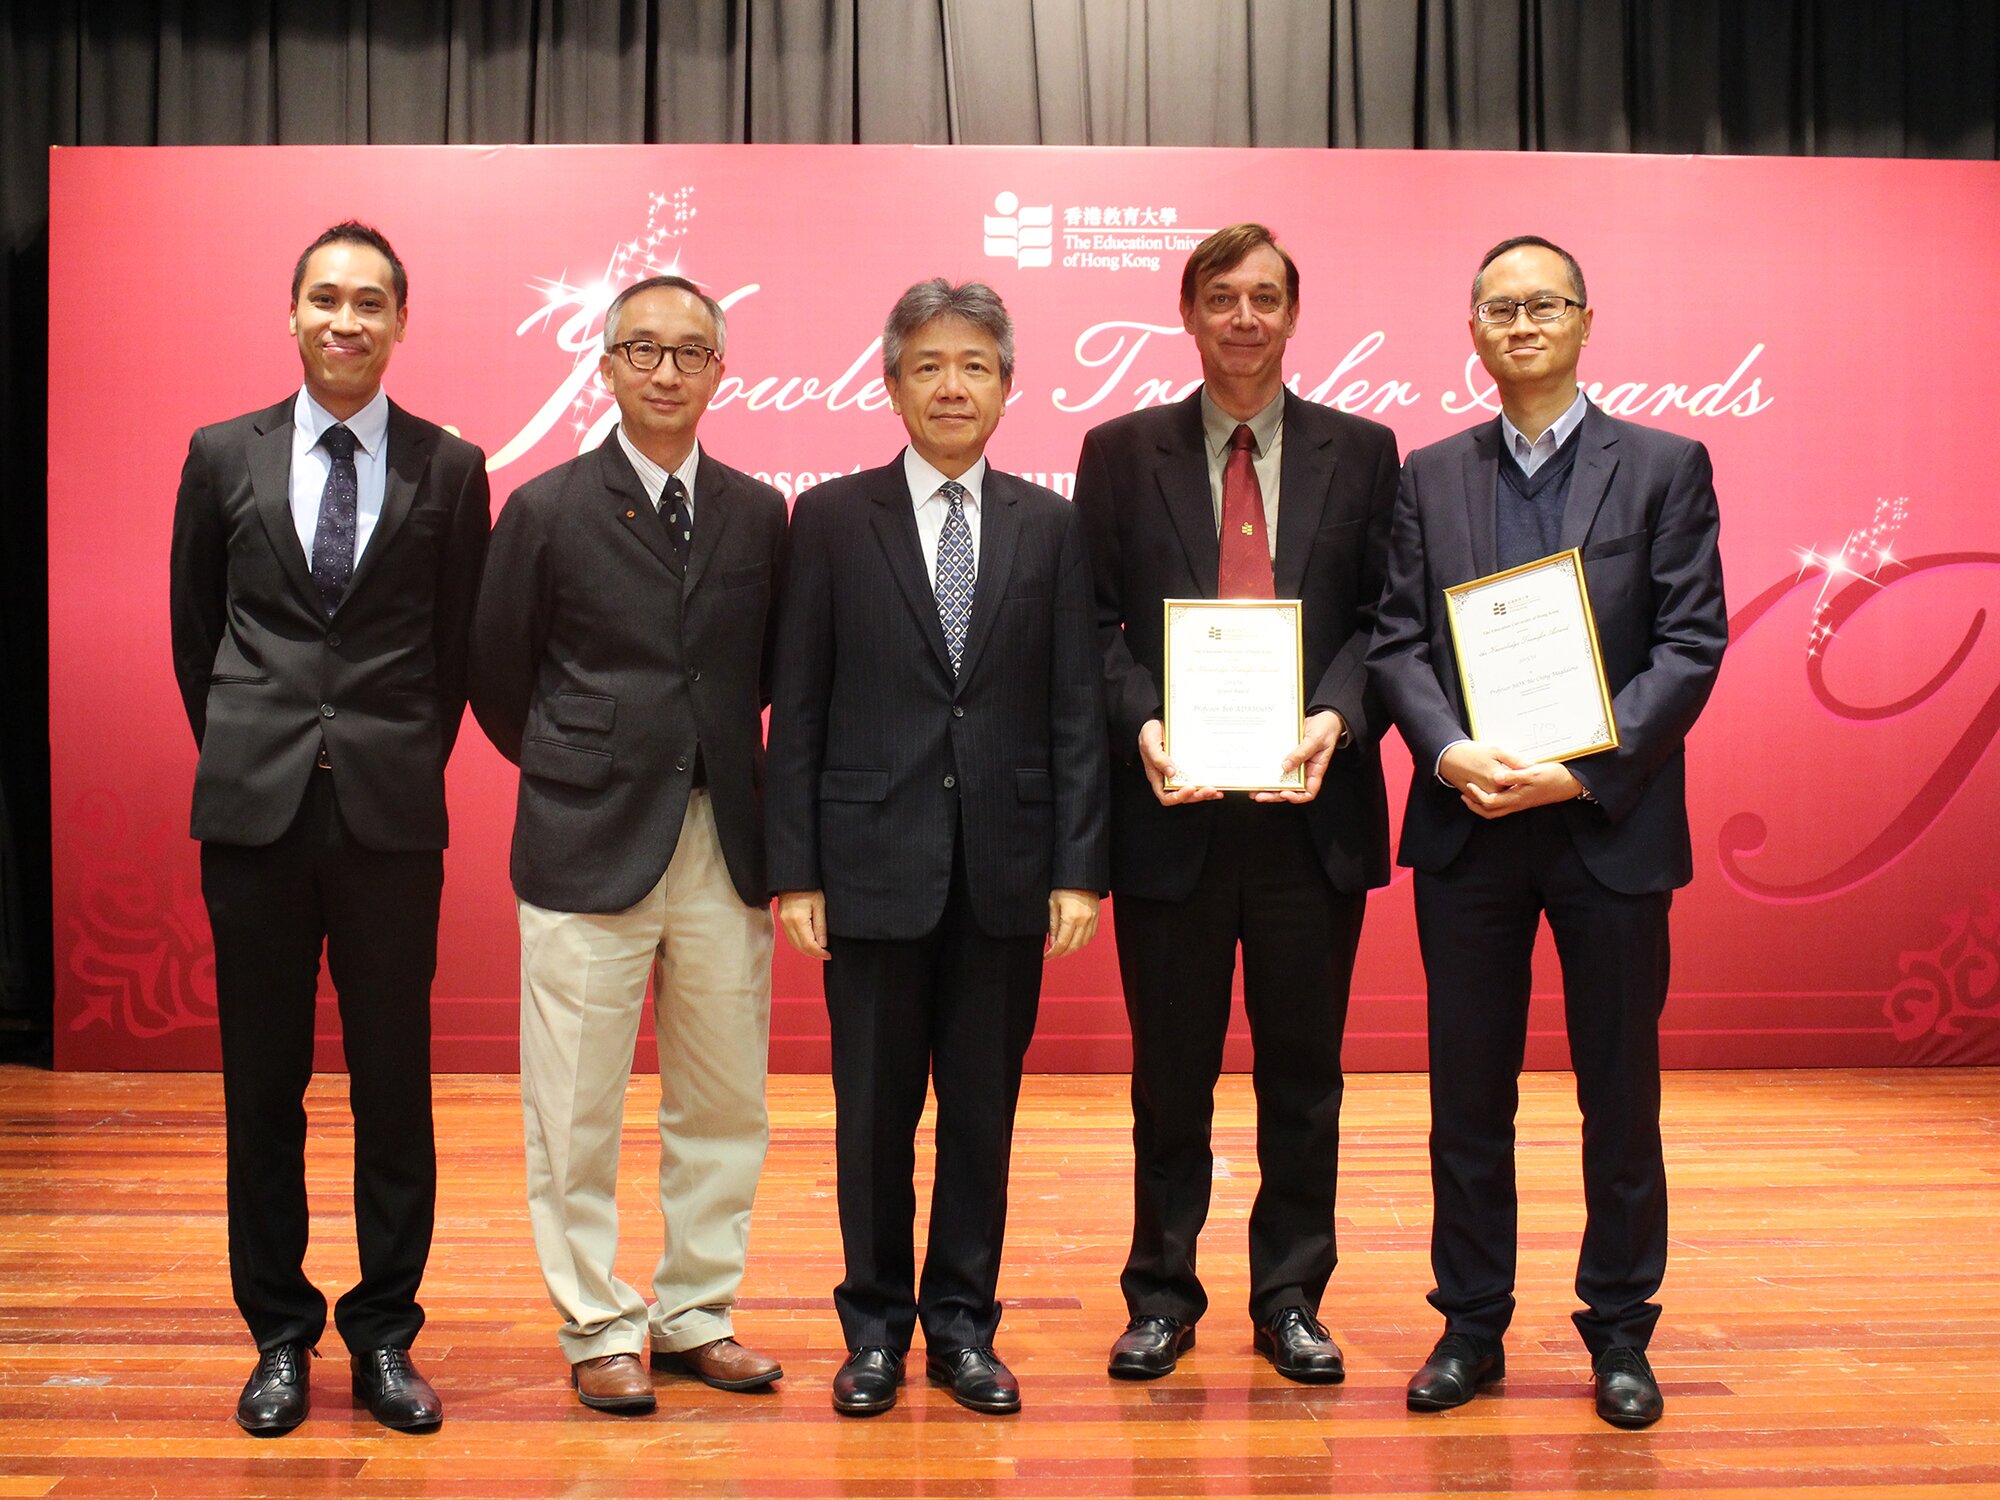 From the left: Dr Stephen Chow Cheuk-fai, Director of Knowledge Transfer; Professor Lui Tai-lok, Vice President (Research and Development); Professor Stephen Cheung Yan-leung, EdUHK President; Professor Bob Adamson, Chair Professor of Curriculum Reform, Department of International Education and Lifelong Learning; and Professor Leung Bo-wah, Head of Department of Cultural and Creative Arts (representing Professor Magdalena Mok Mo-ching and the team).